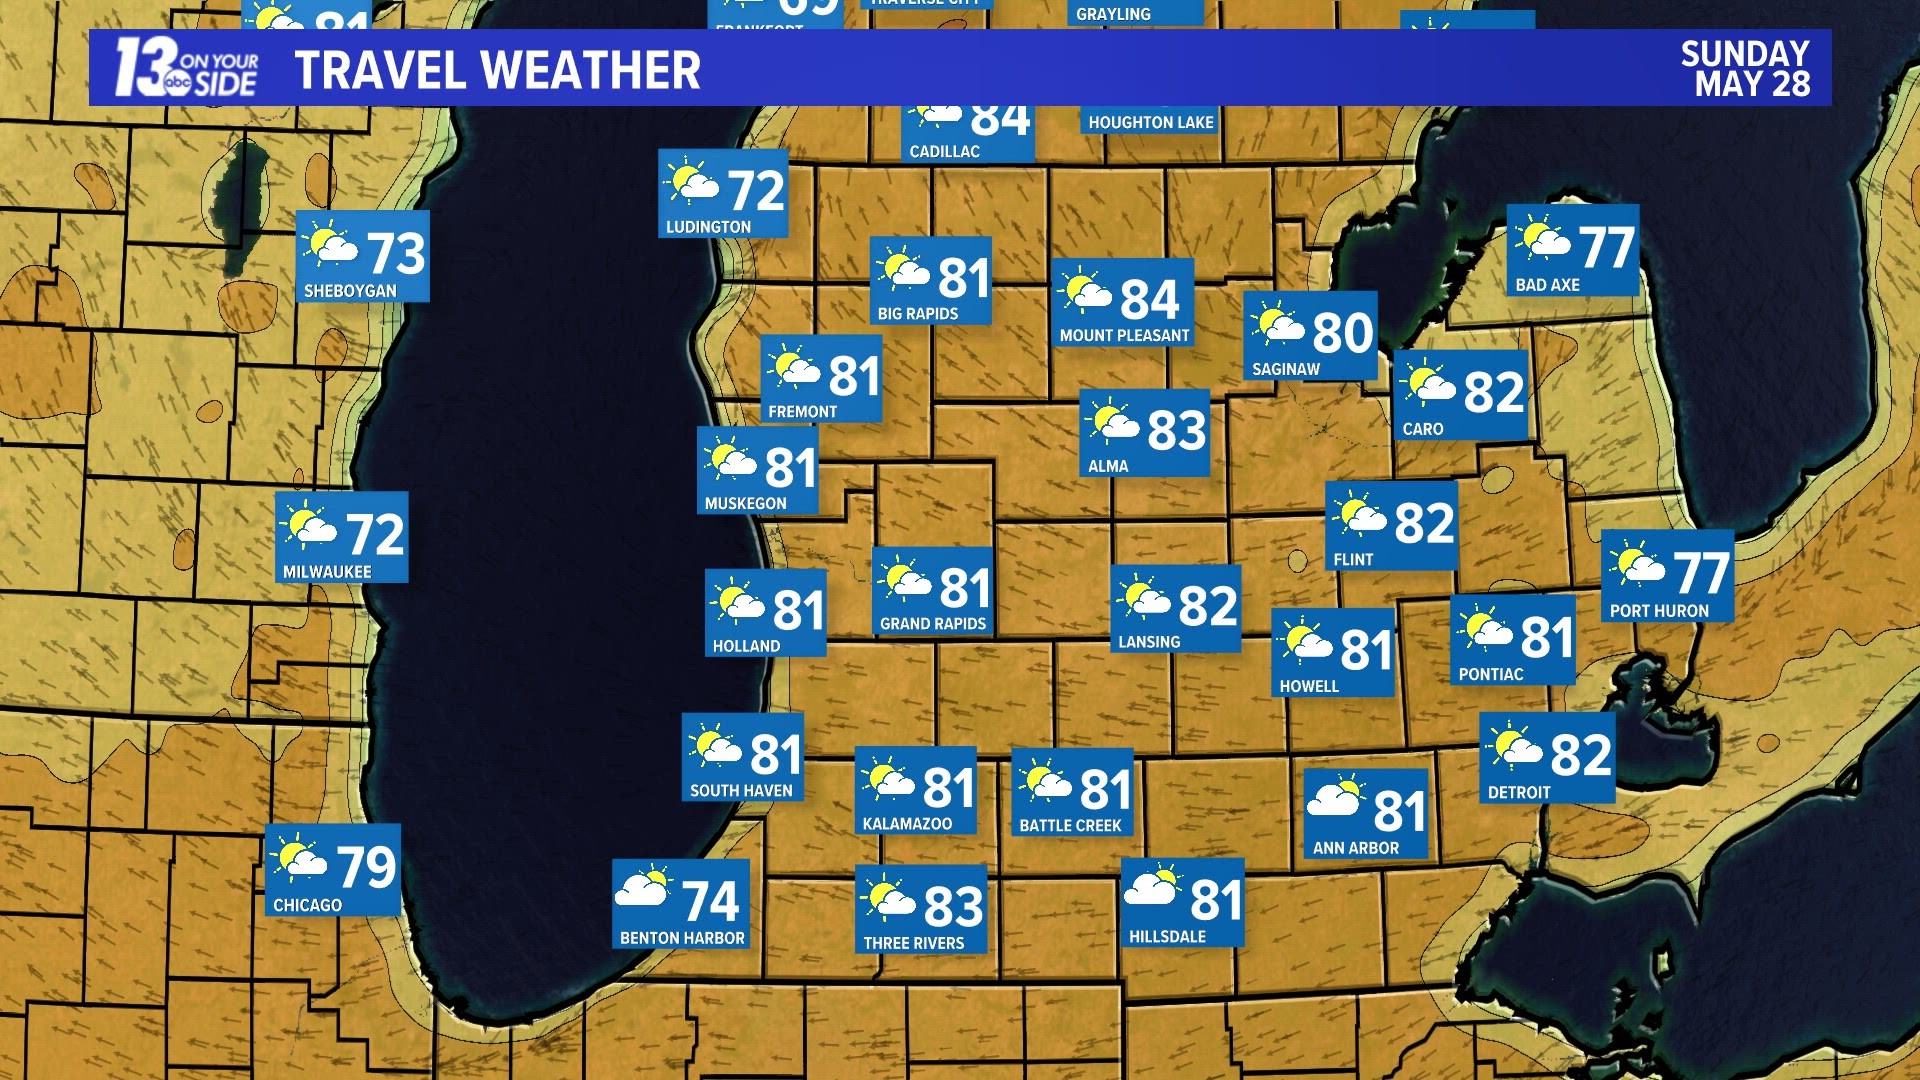 Temperatures break into the 80s Sunday across most of Lower Michigan and around 80° most of the U.P.